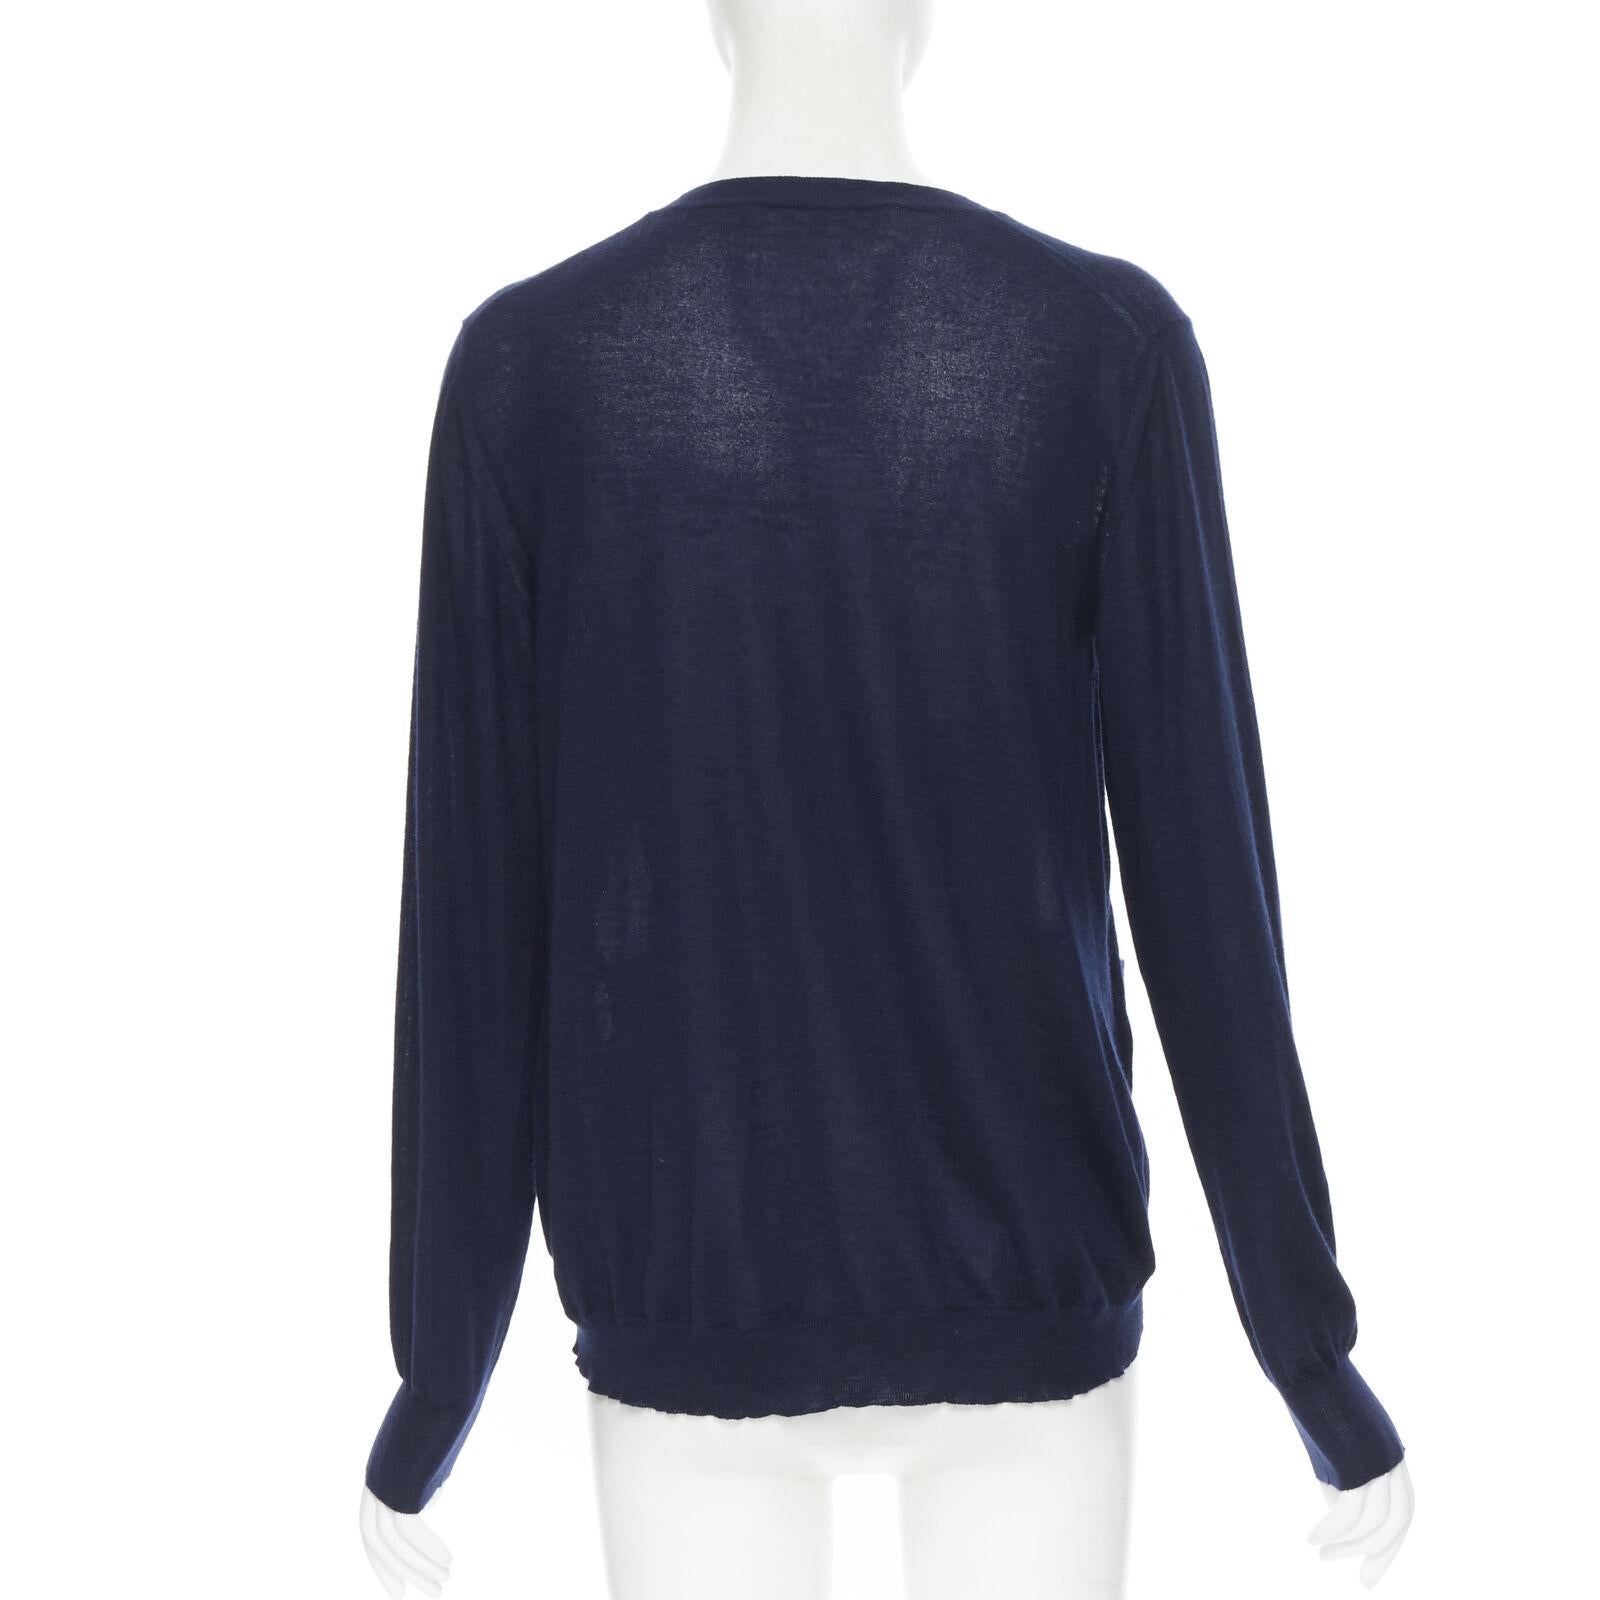 MARNI navy blue cashmere dual front slit pocket long sleeve sweater IT40 S 1